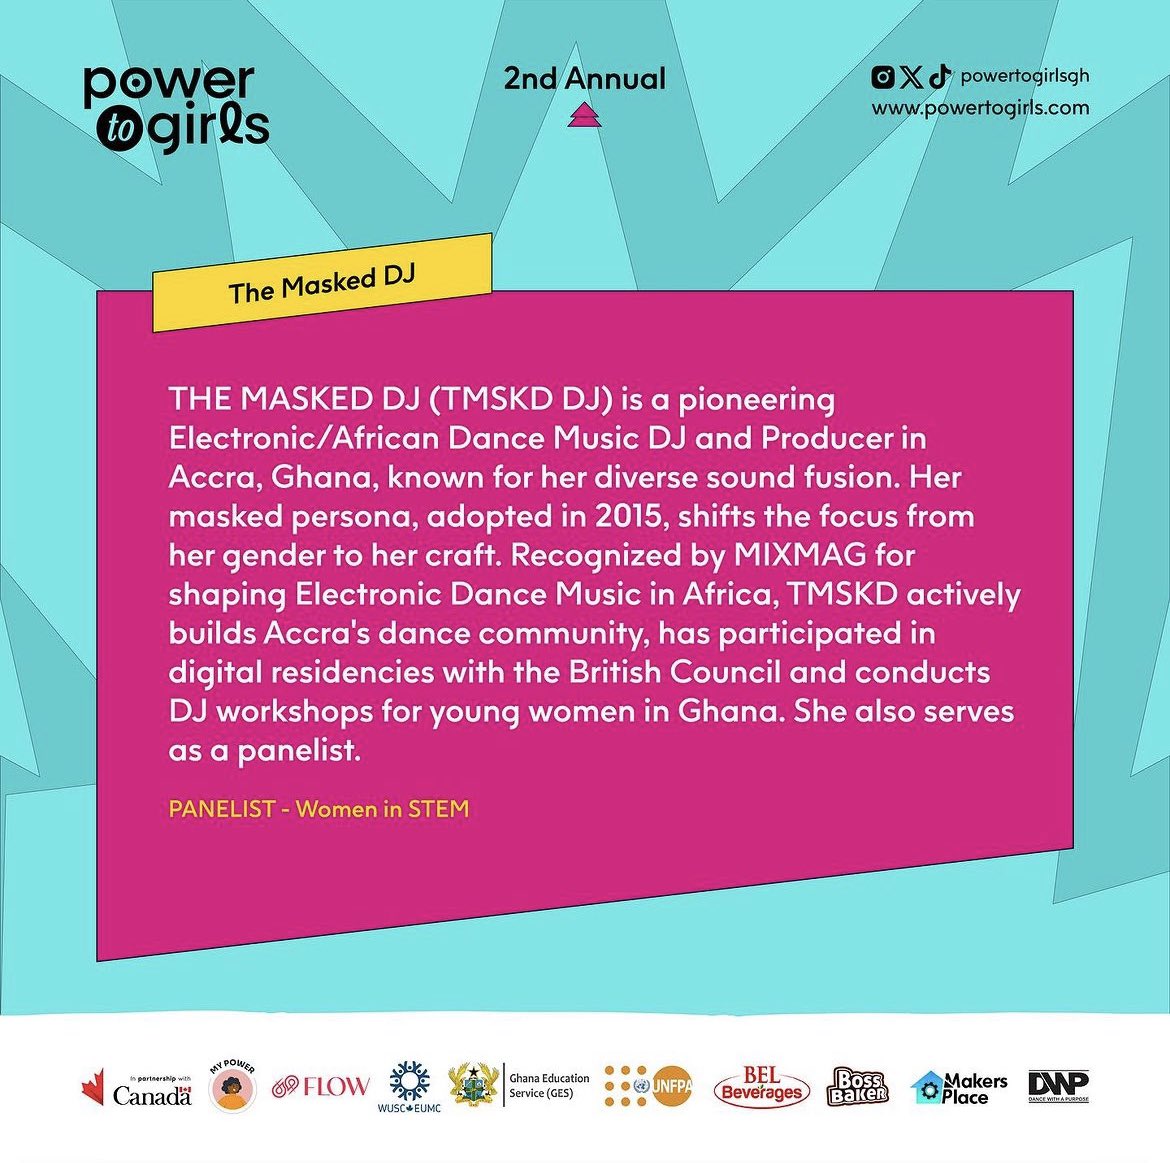 COMMUNITY:

our palace favorite @TMSKDDJ will be playing here @PowerToGirlsGh and speaking on a panel on #womeninsteam.